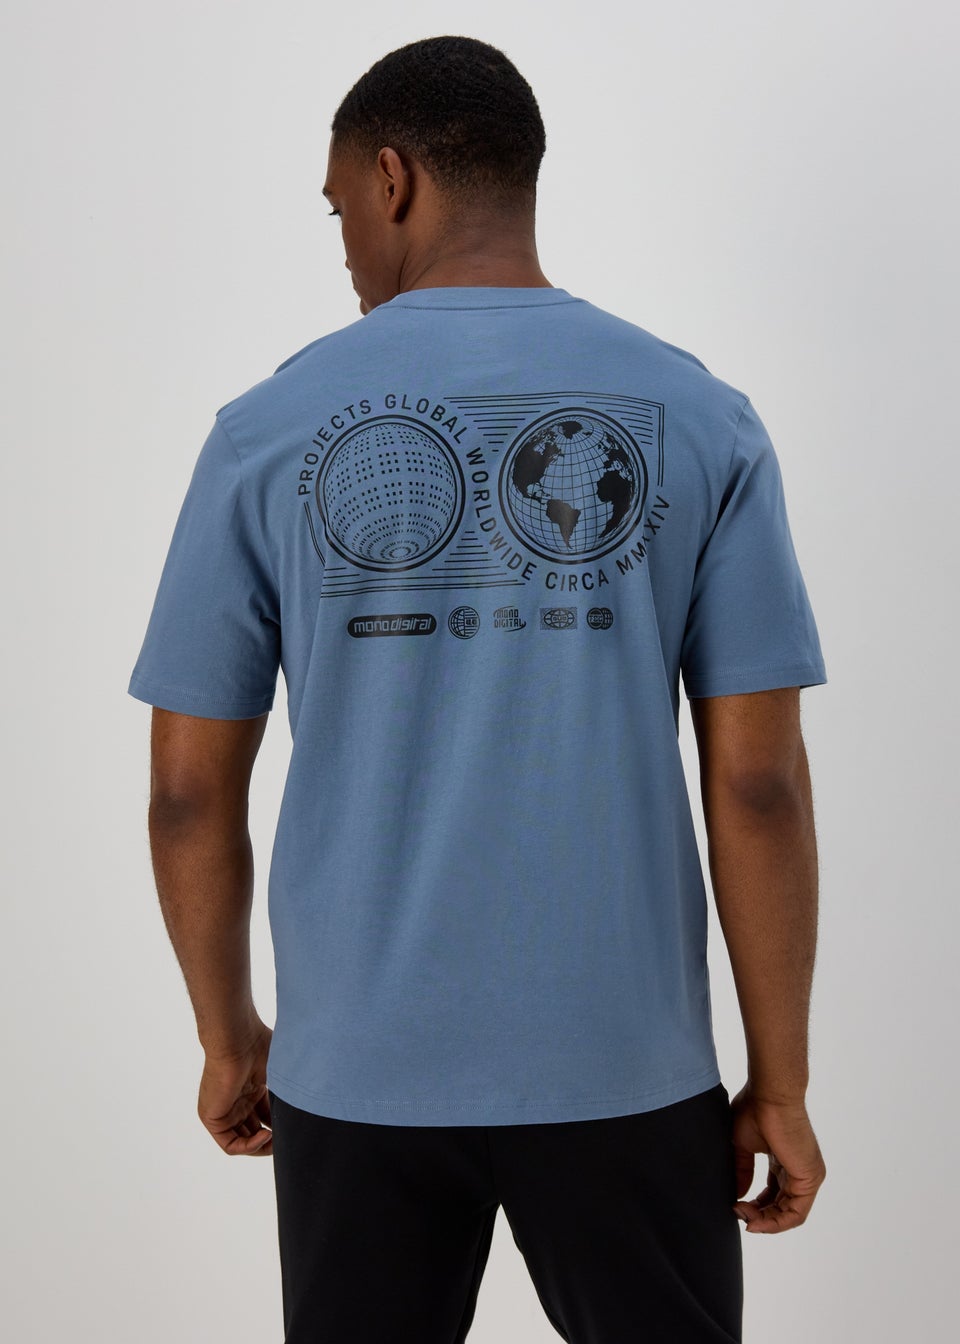 US Athletic Blue Graphic T-Shirt